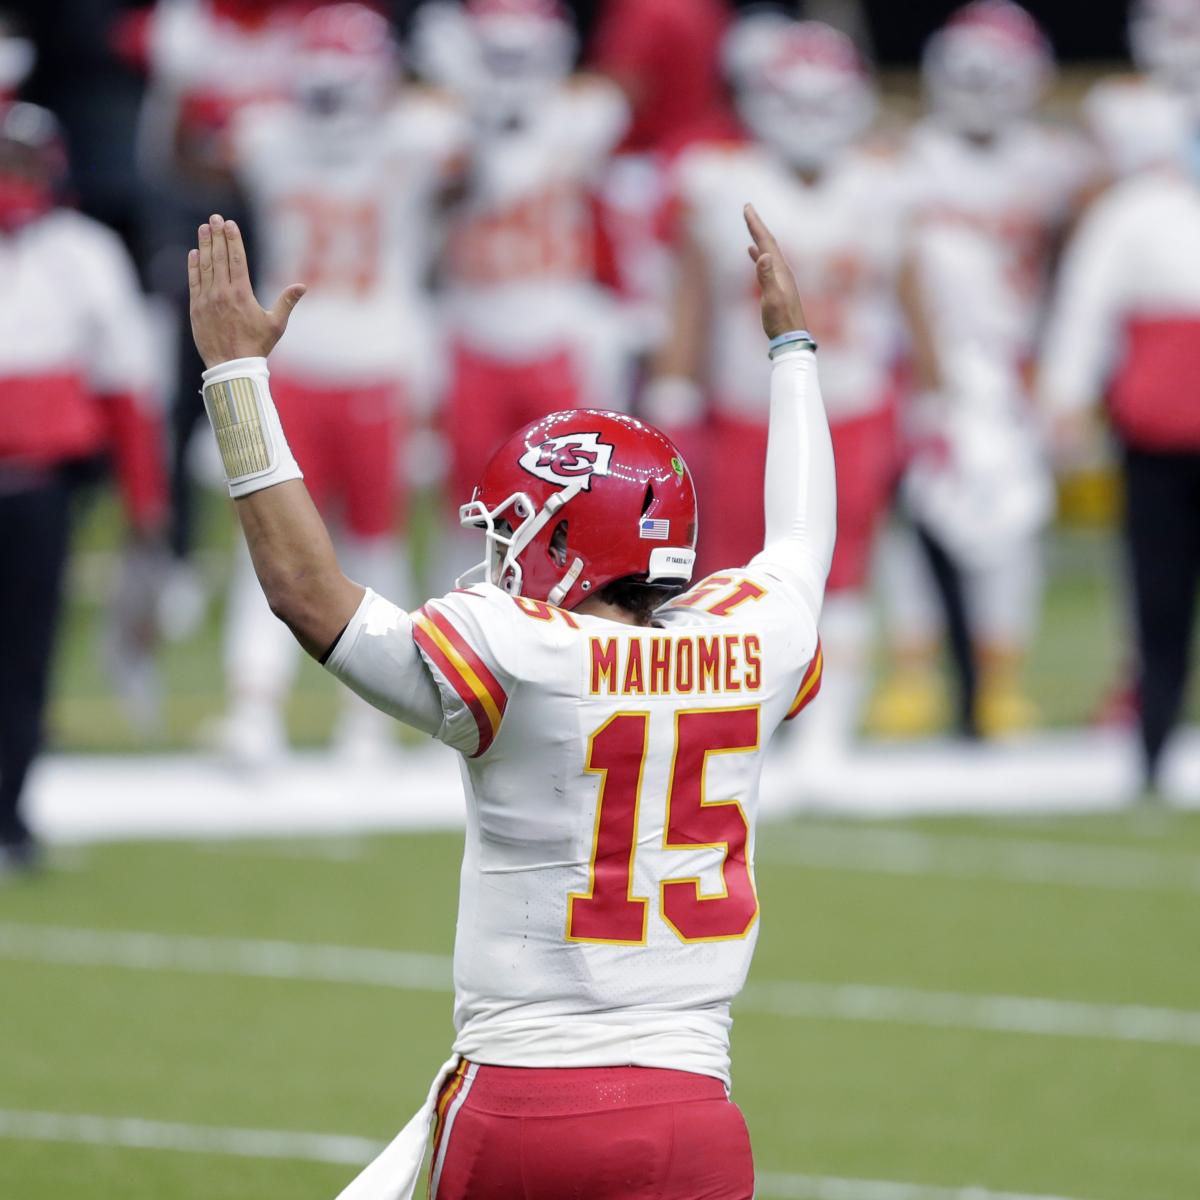 Patrick Mahomes, Russell Wilson Lead Fan Vote casting for 2021 NFL Pro Bowl